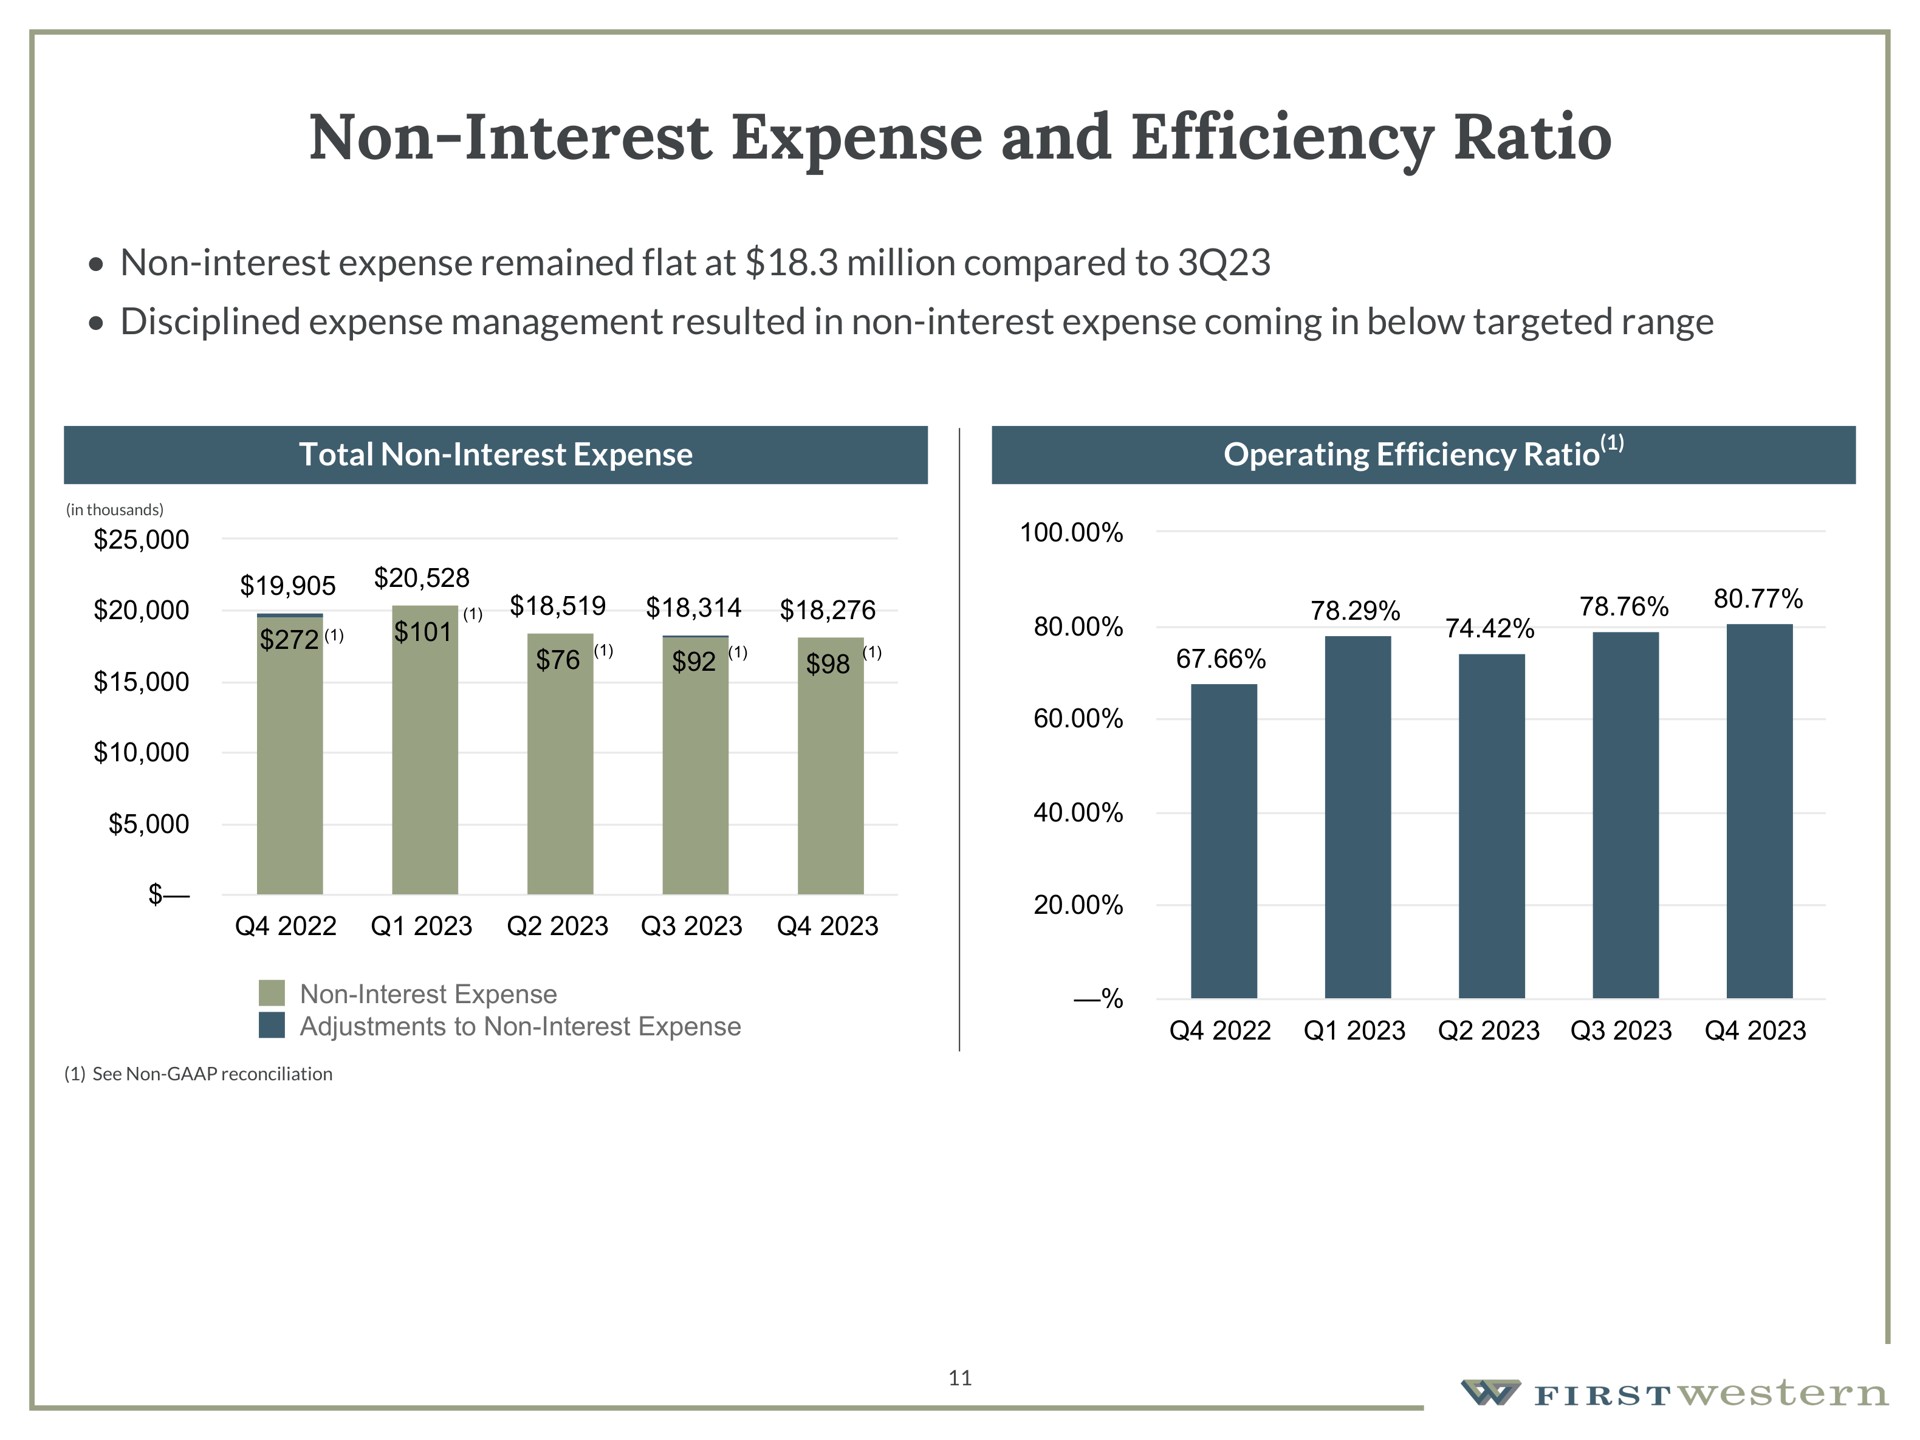 non interest expense and efficiency ratio non interest expense remained flat at million compared to disciplined expense management resulted in non interest expense coming in below targeted range total non interest expense operating efficiency ratio | First Western Financial